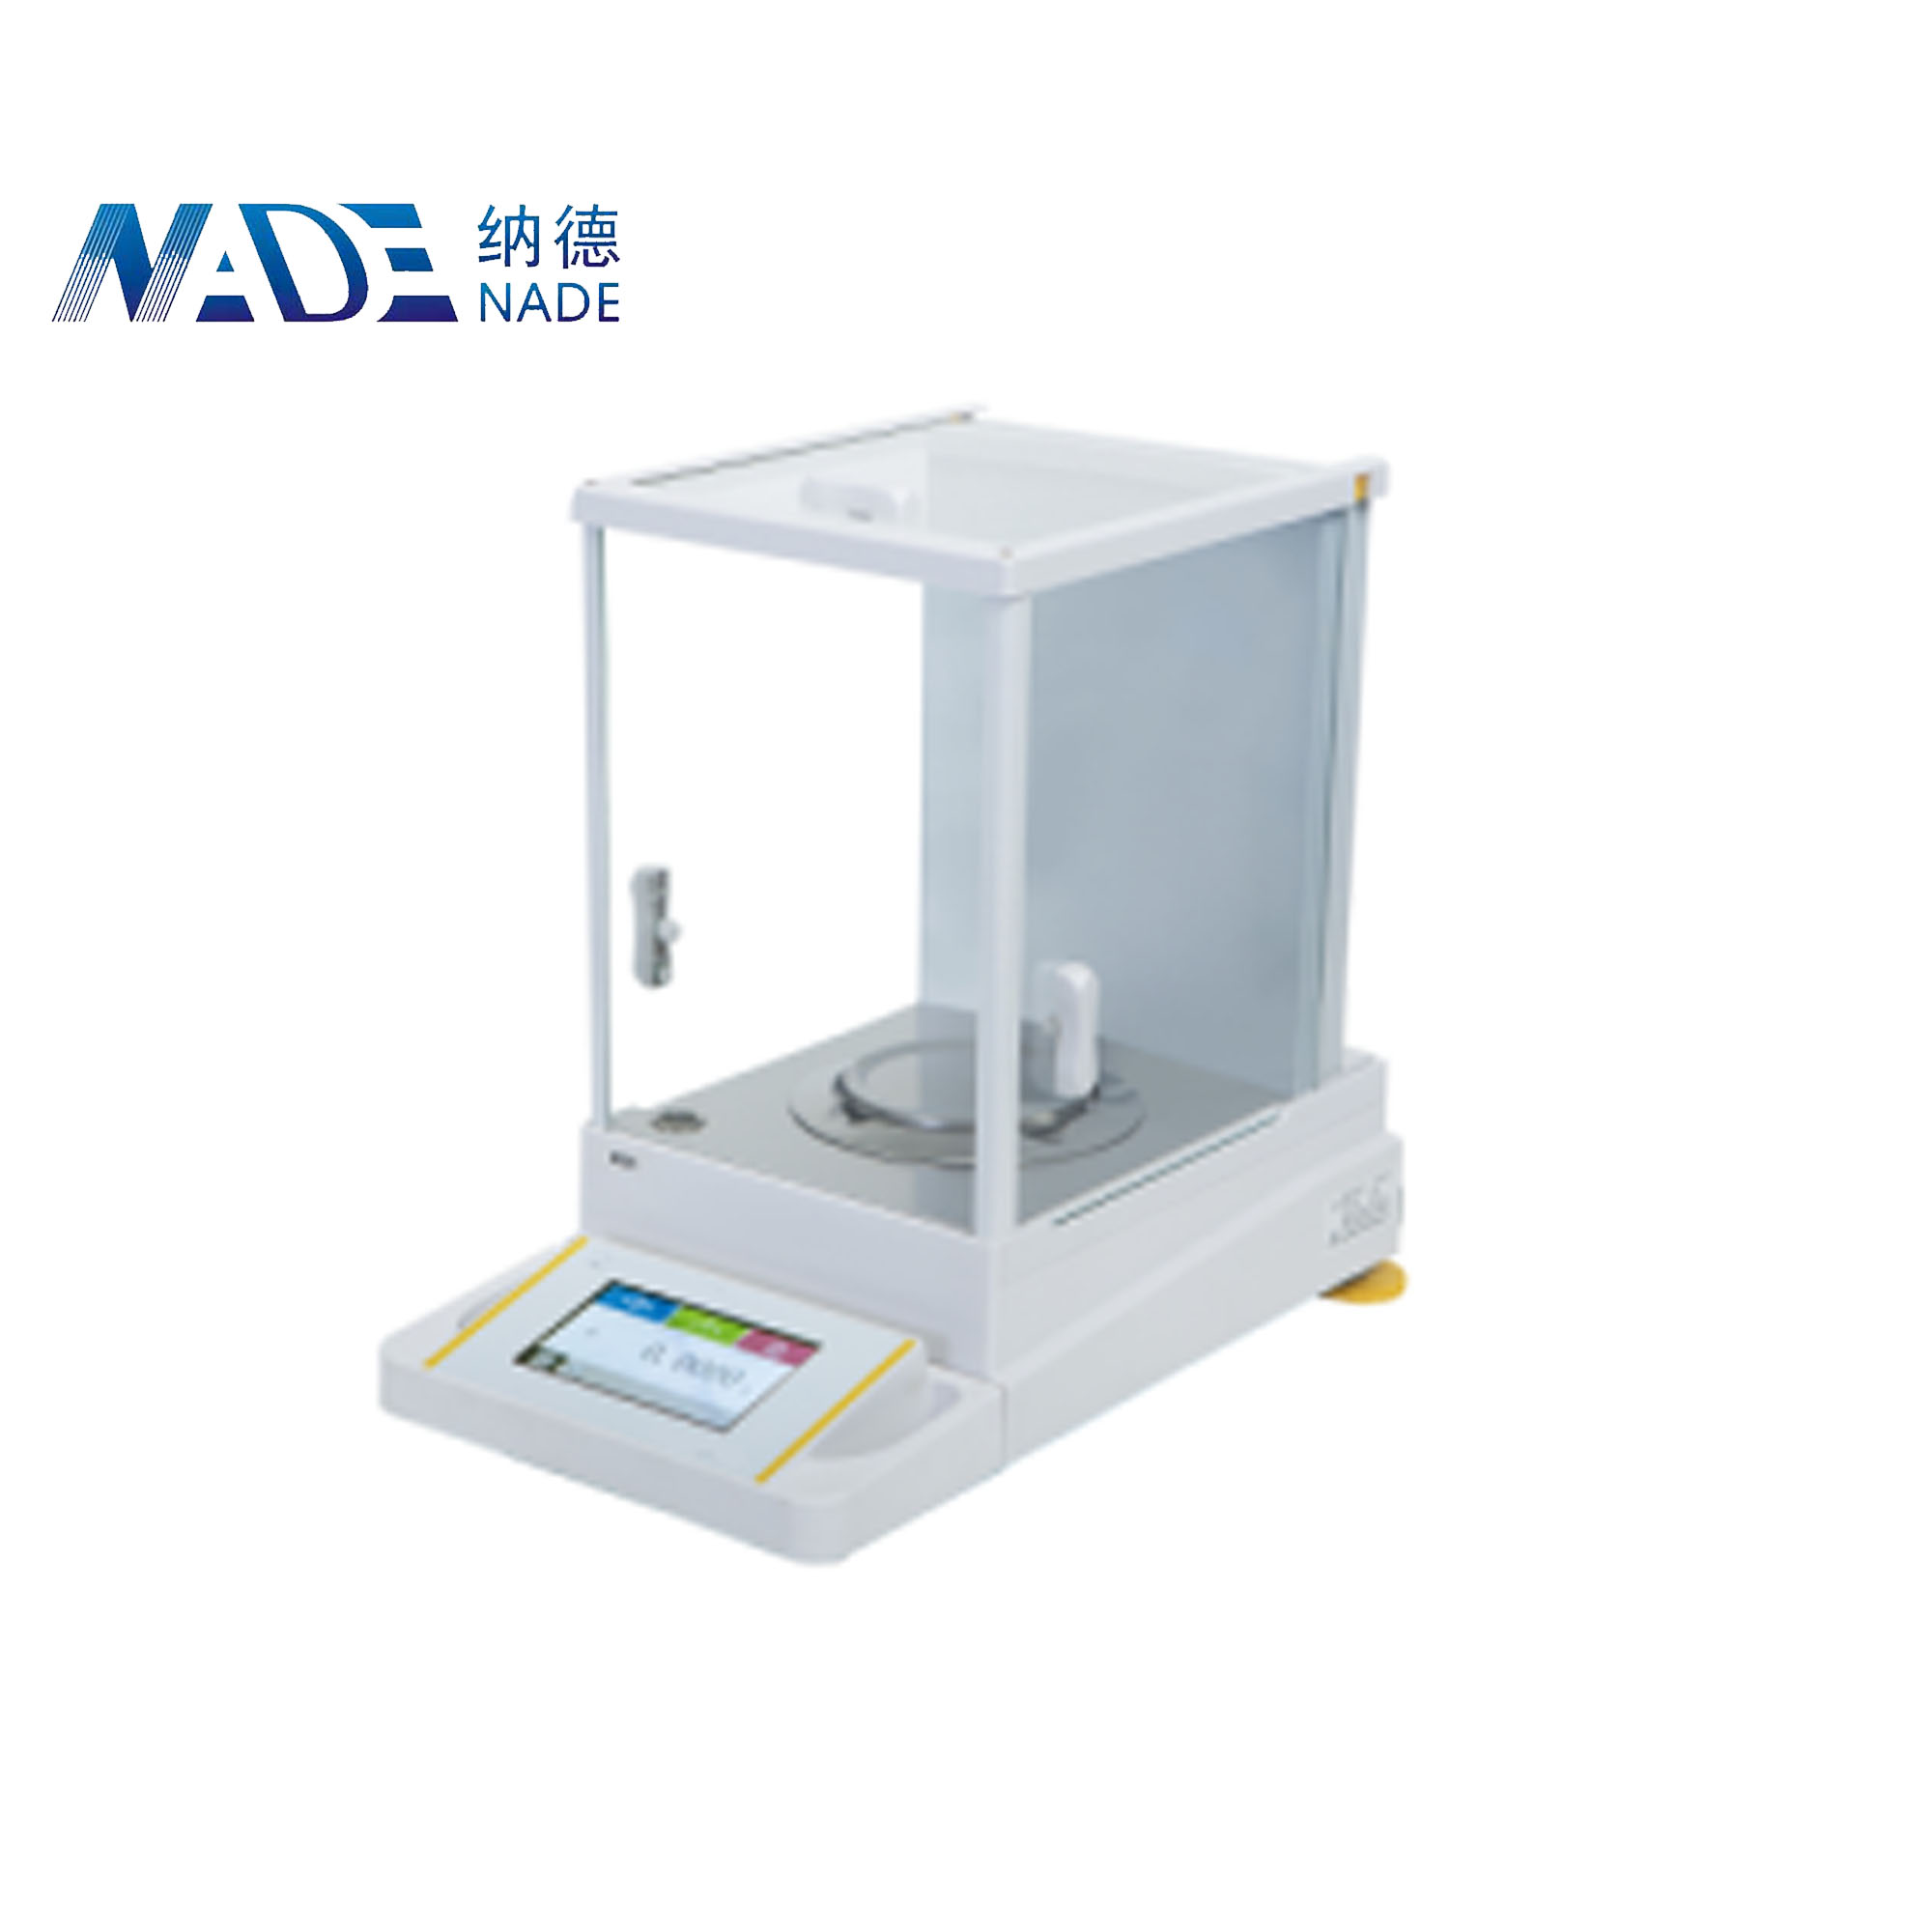 Nade AE Touch Color Screen Electronic Analytic Balance AE124 120g/0.1mg